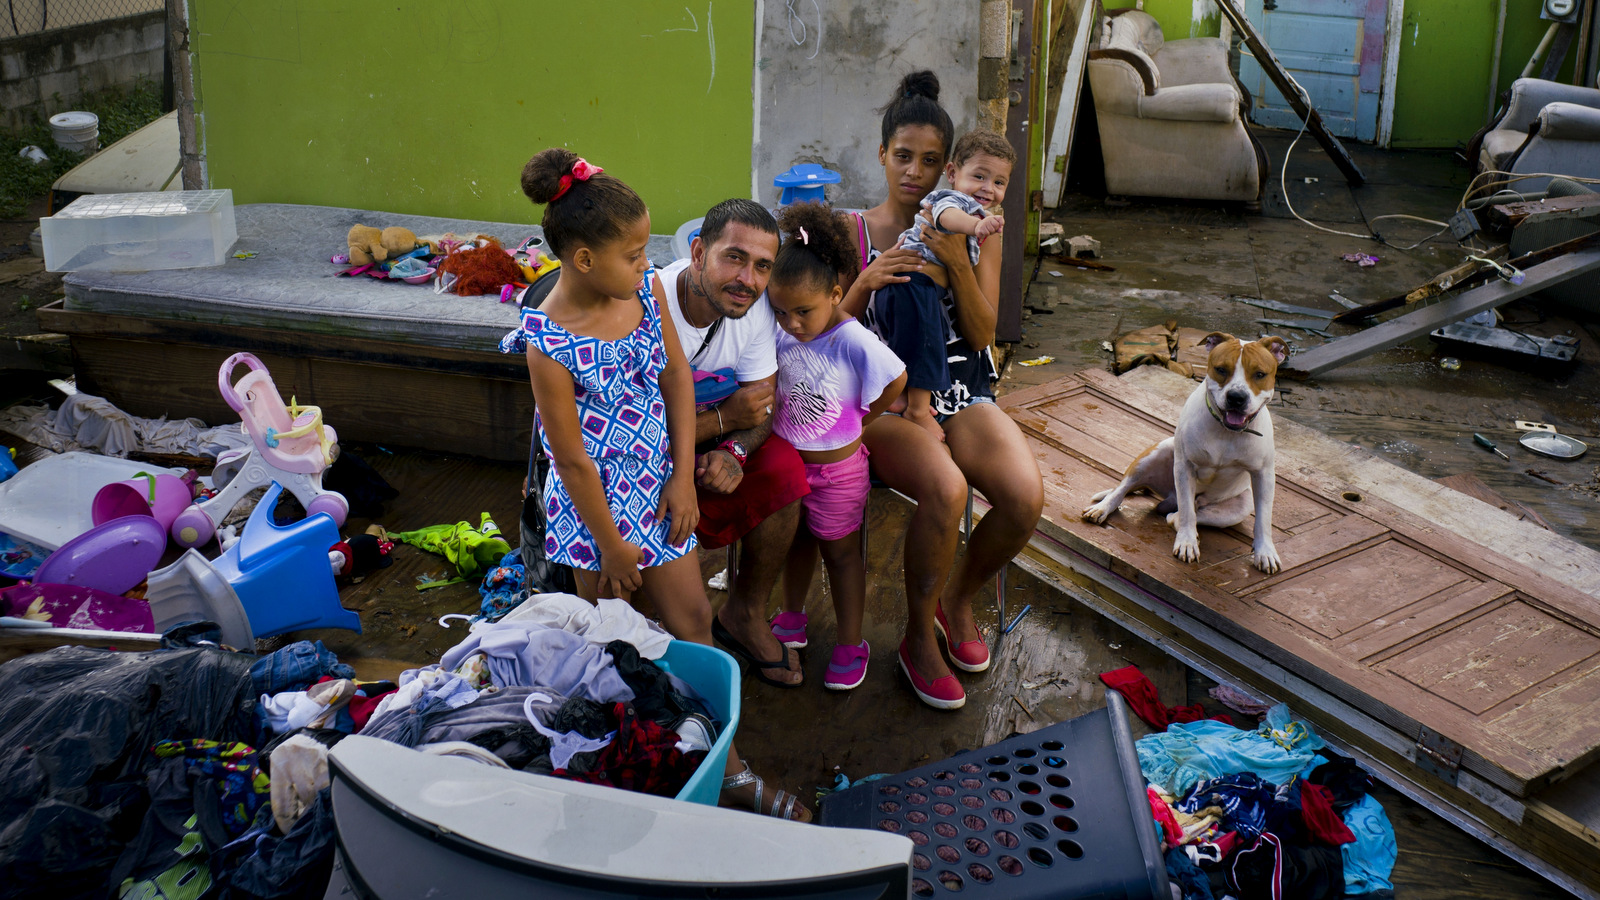 In this Saturday, Oct. 14, 2017 photo, Arden Dragoni, second from left, poses with his wife Sindy, their three children and dog Max, surrounded by what remains of their home destroyed by Hurricane Maria in Toa Baja, Puerto Rico. The Dragoni family has been living in a shelter set up at a school since the storm destroyed their wooden home in late September. They lost everything: clothes, household goods, and an old car. Dragoni supported his family by working construction, but his employers are currently out of business, leaving him and his family without a source of income. (AP/Ramon Espinosa)